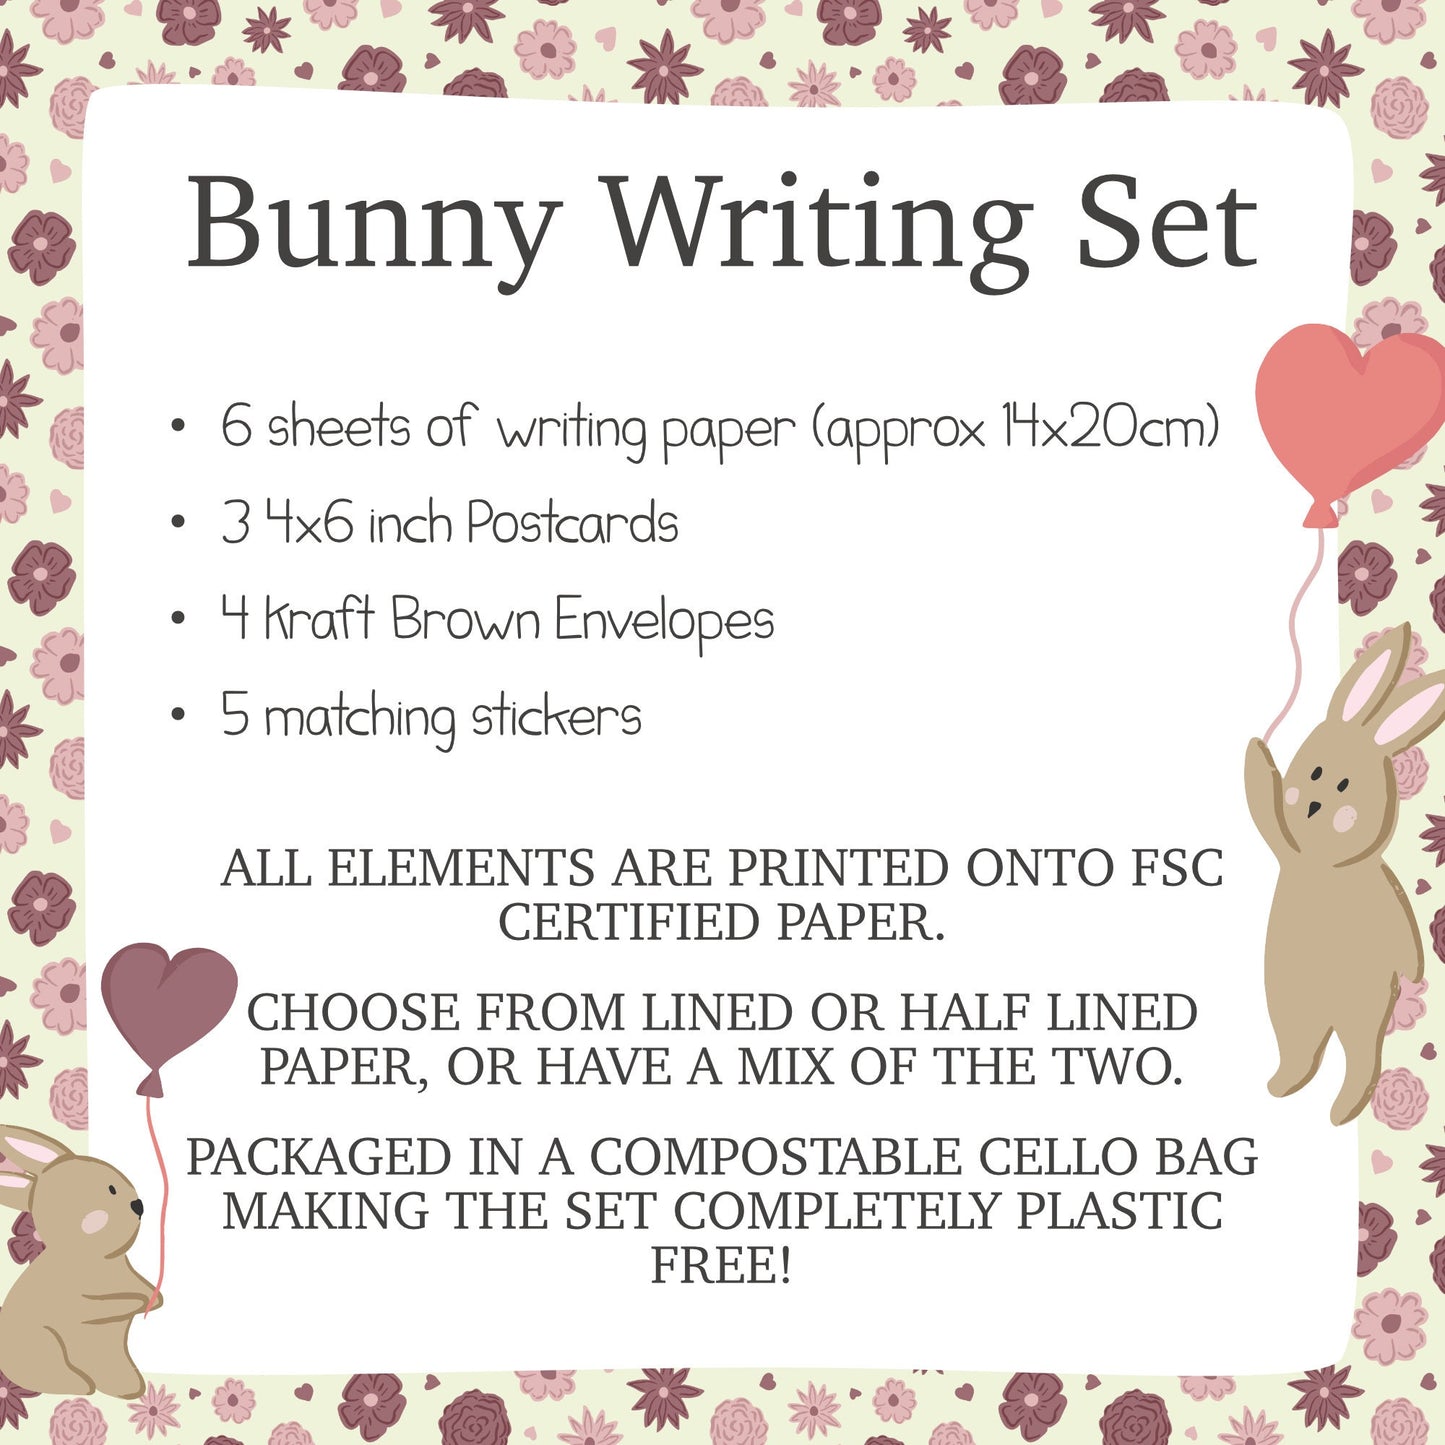 Bunny Rabbit Writing Set For Children, Cute Valentines Activity For Kids, Personalised Notecard Set